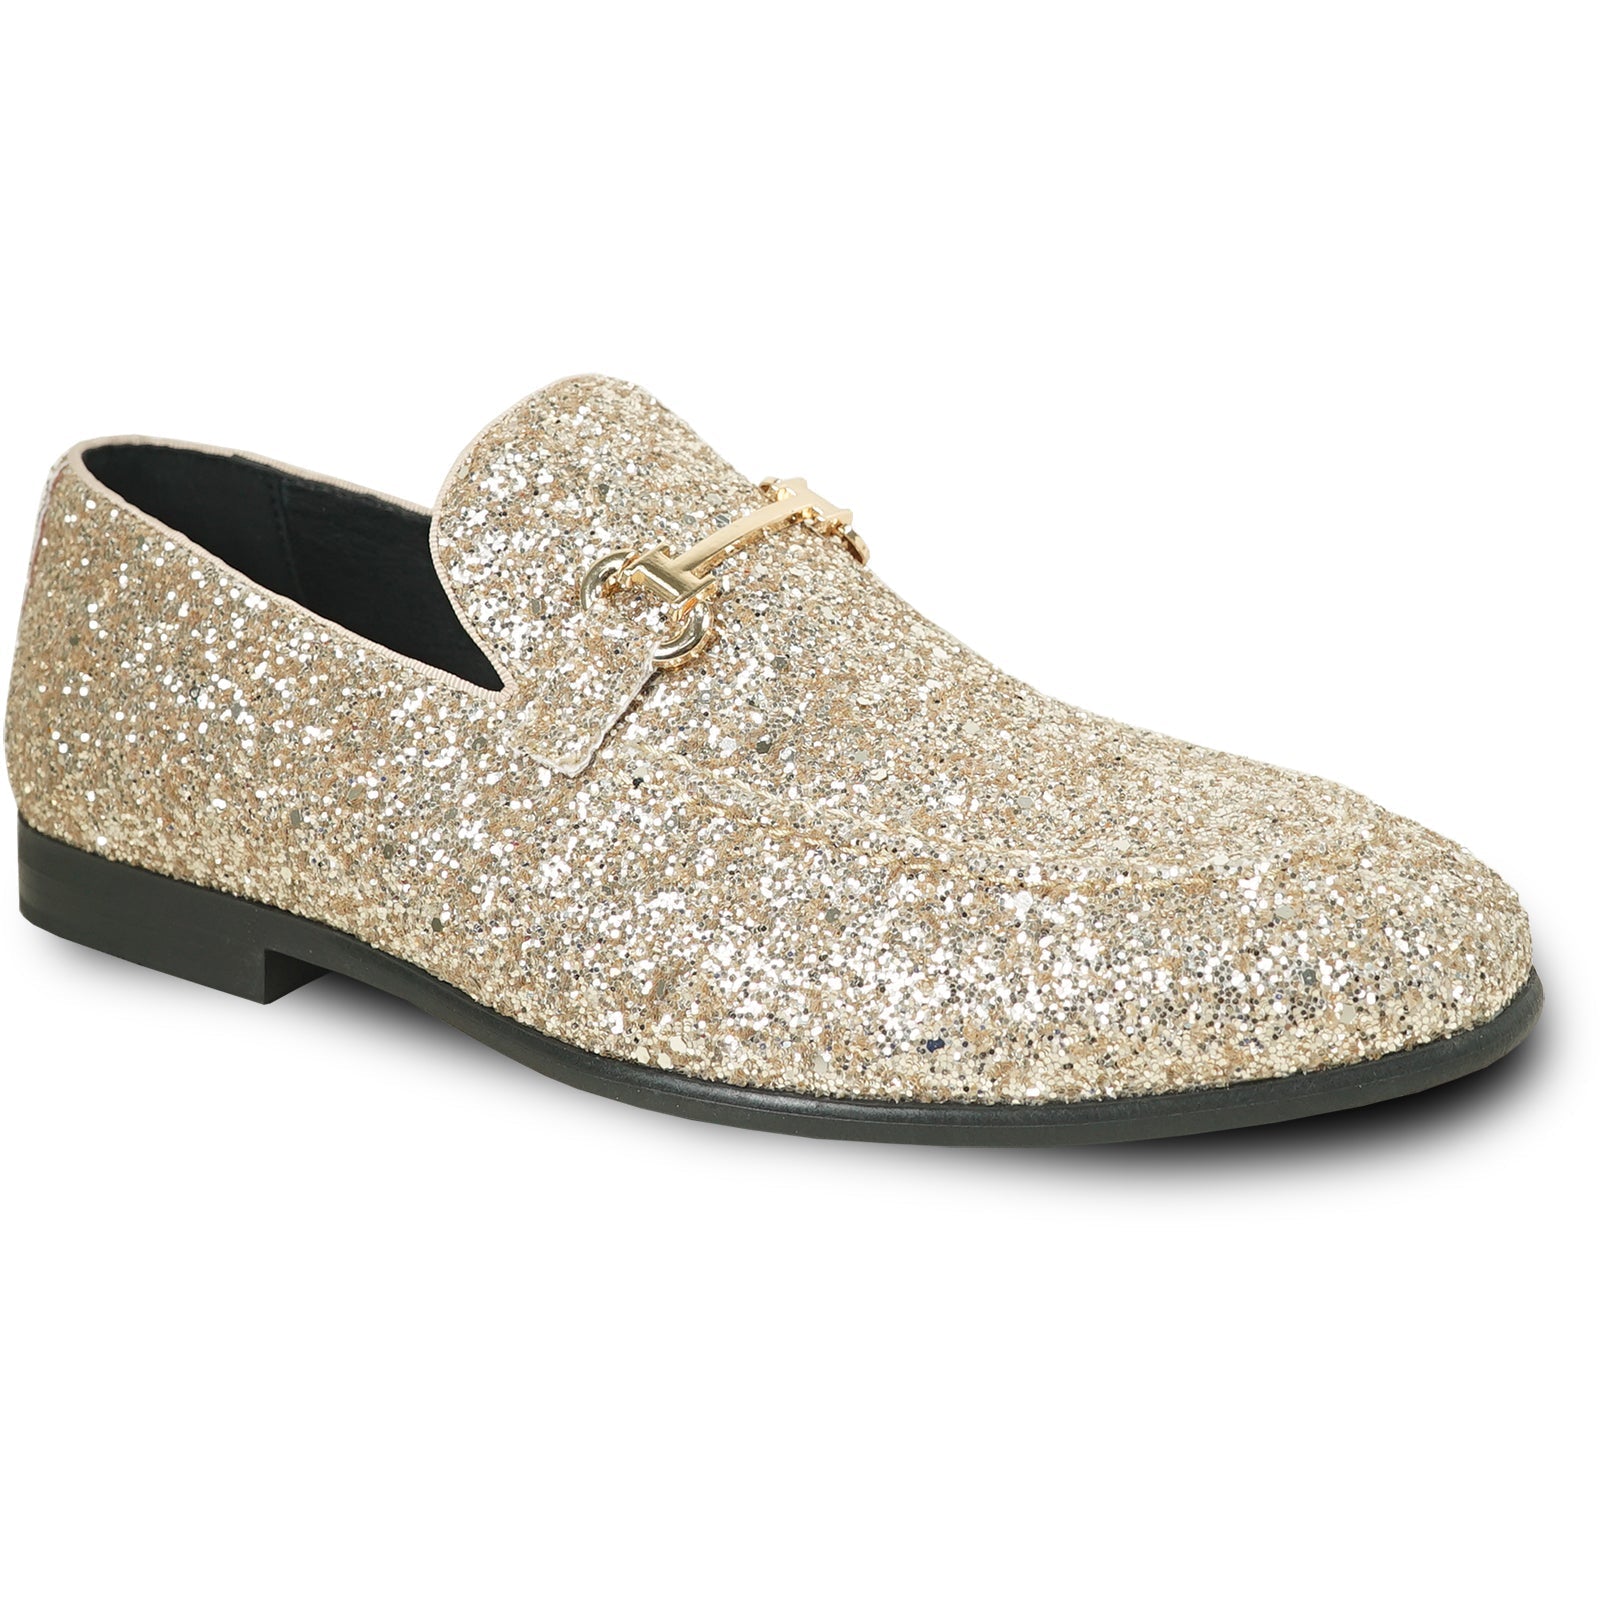 "Gold Sequin Prom Tuxedo Loafers - Modern Men's Glitter Buckle Shoes"